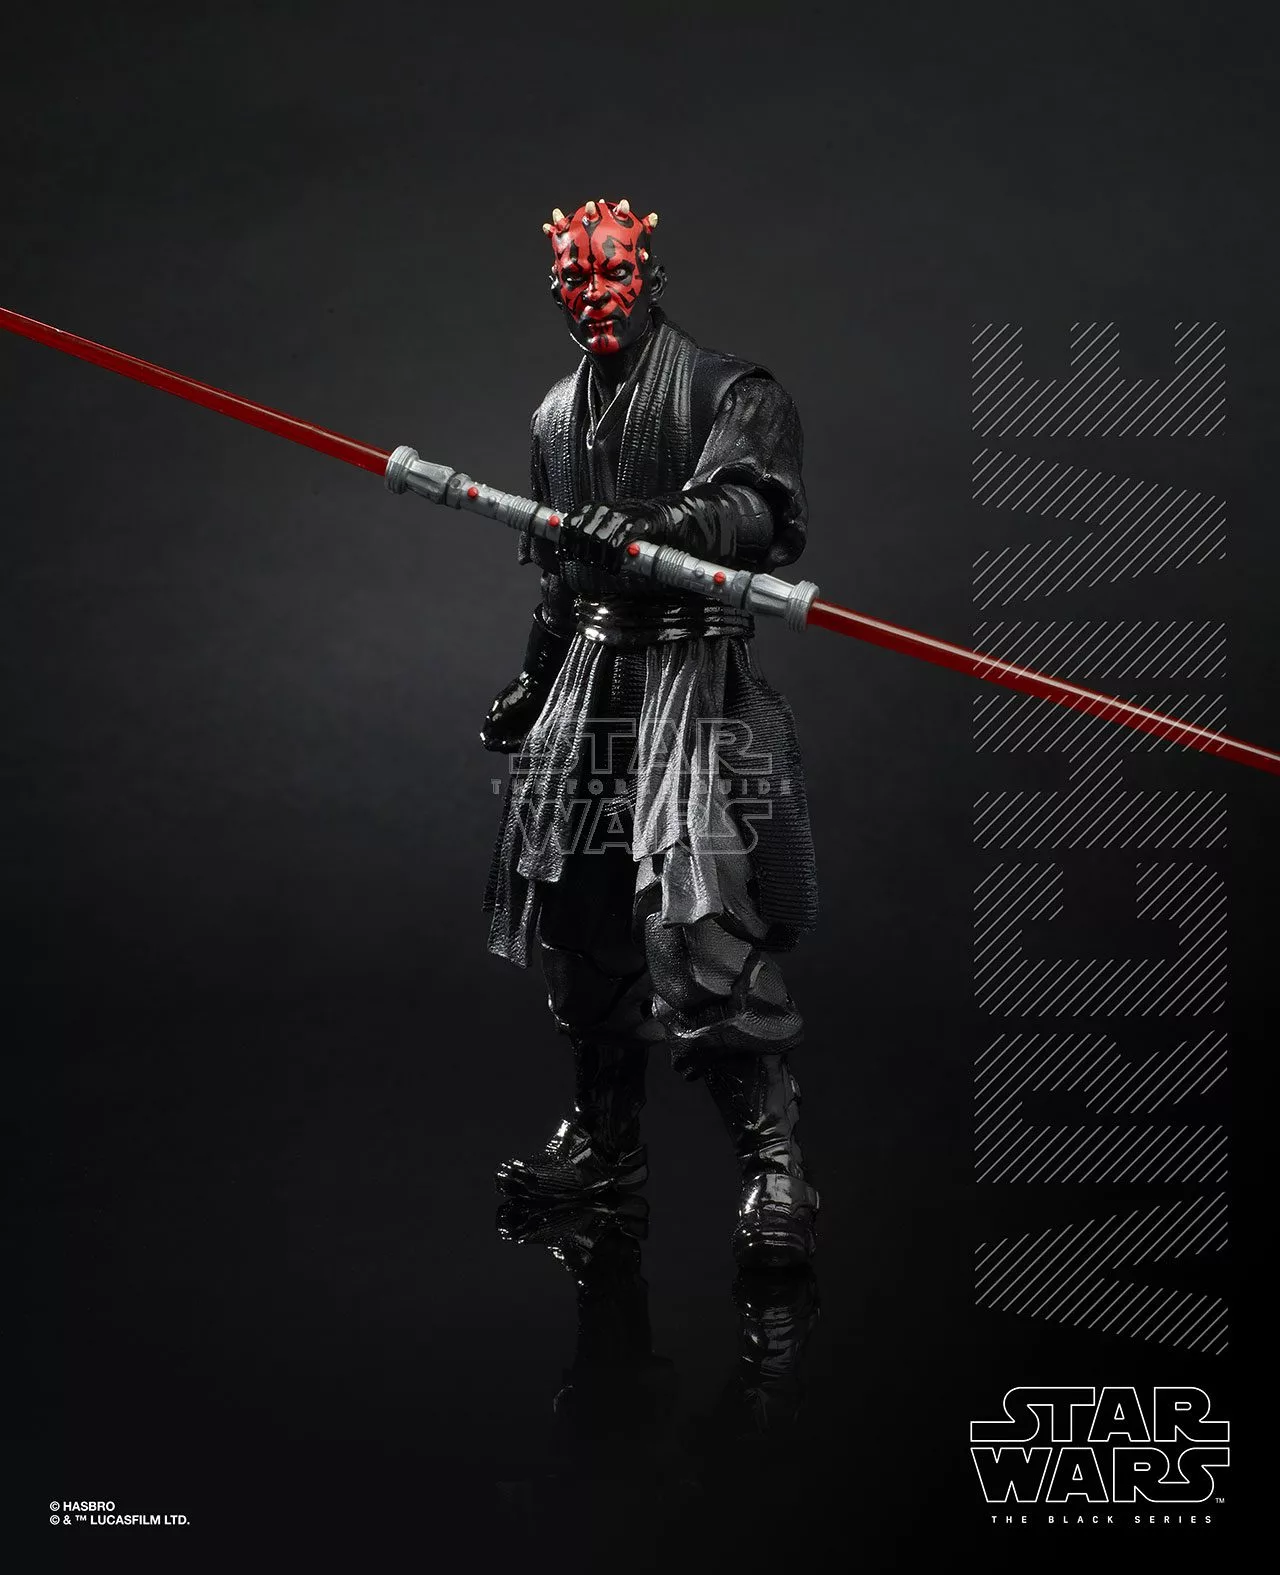 STAR-WARS-THE-BLACK-SERIES-ARCHIVE-6-INCH-Figure-Assortment---Darth-Maul-(oop-2)